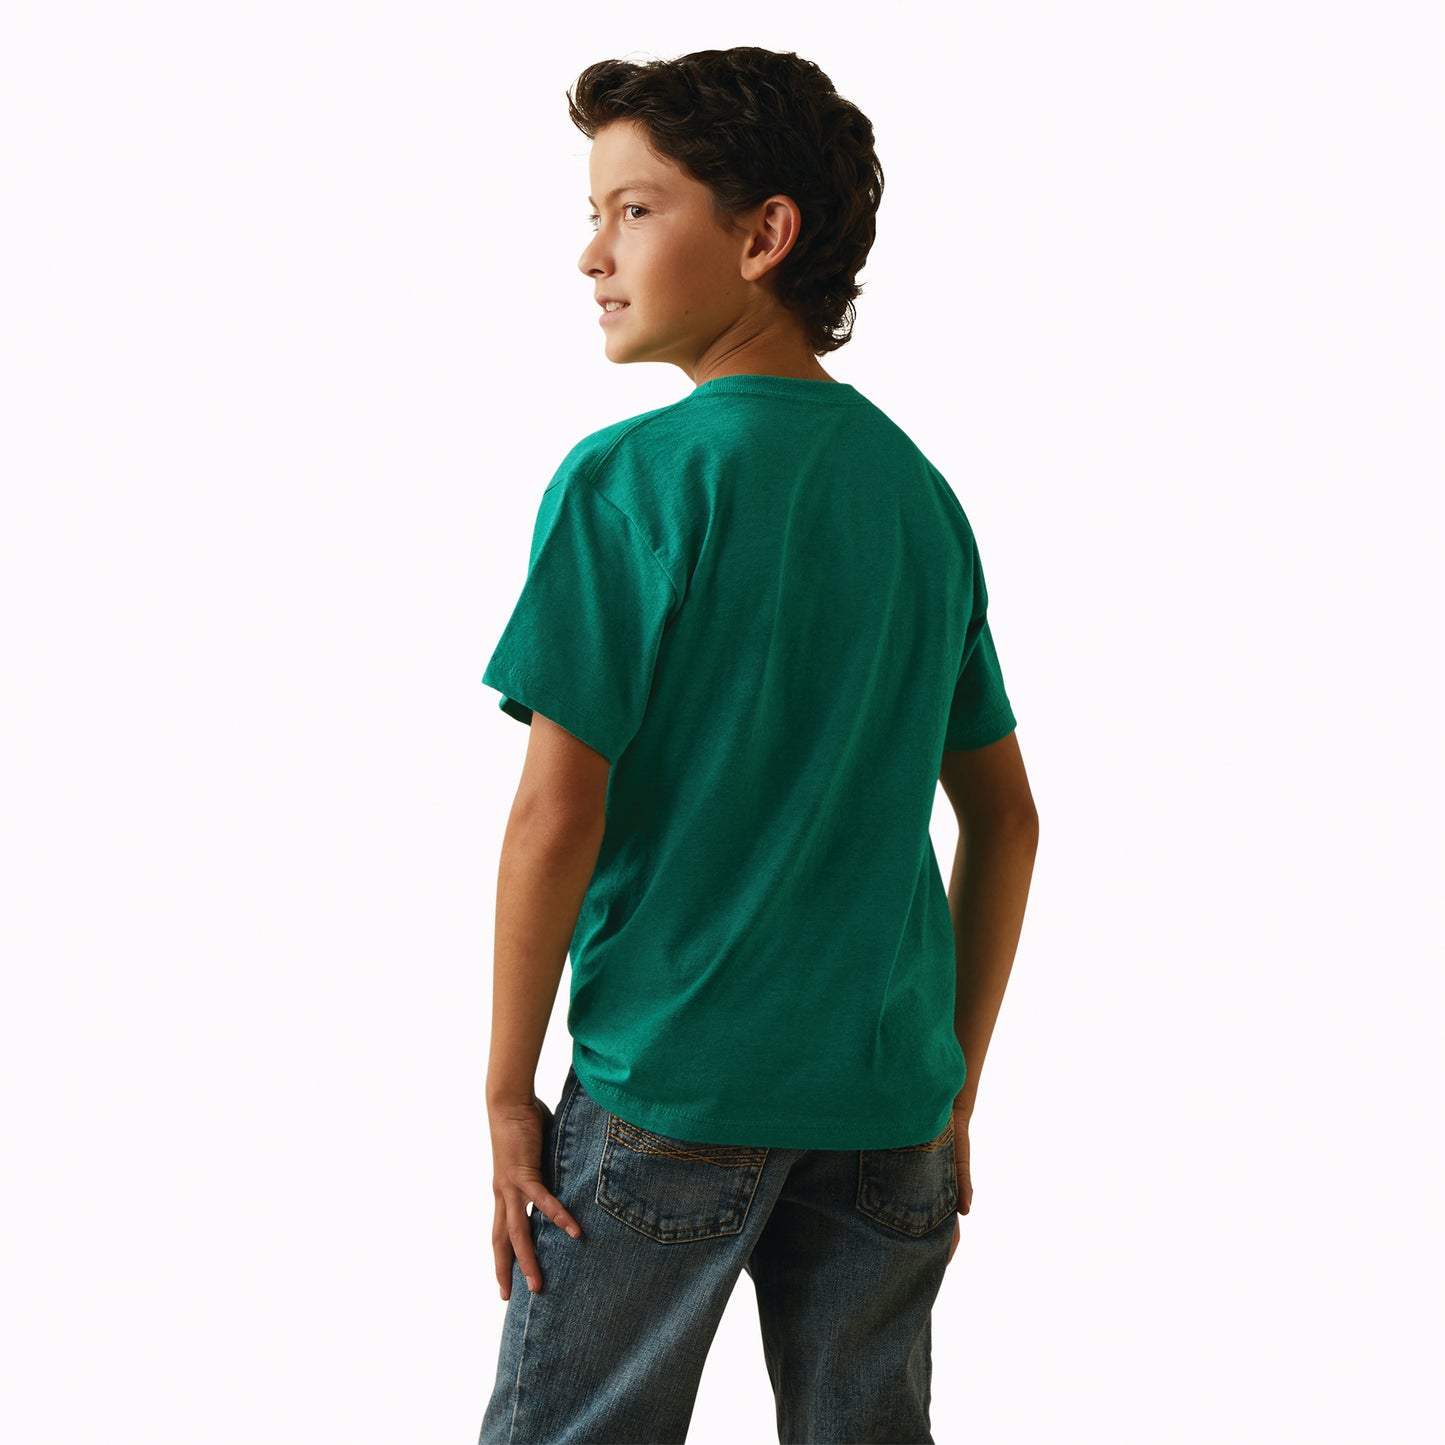 Ariat® Youth Boy's Viva Mexico Independent Green T-Shirt 10043064